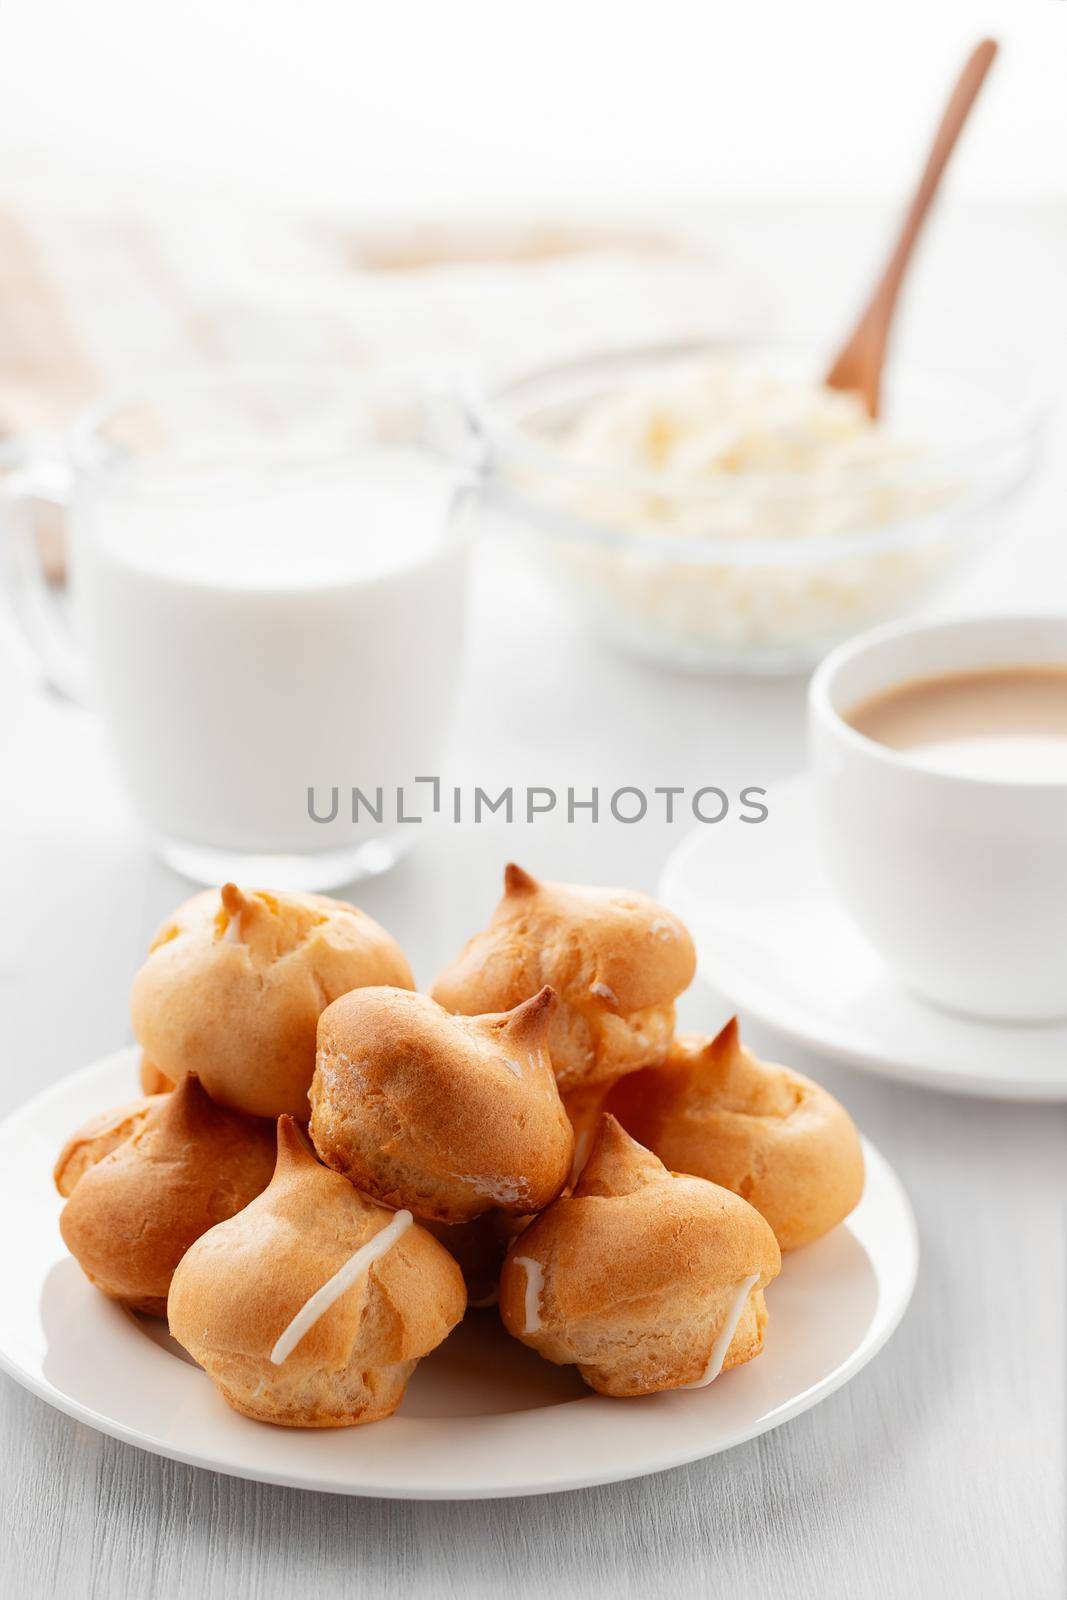 Morning coffee with cakes. Profiteroles, coffee, cream, cottage cheese on a white wooden table. Vertical image by galsand